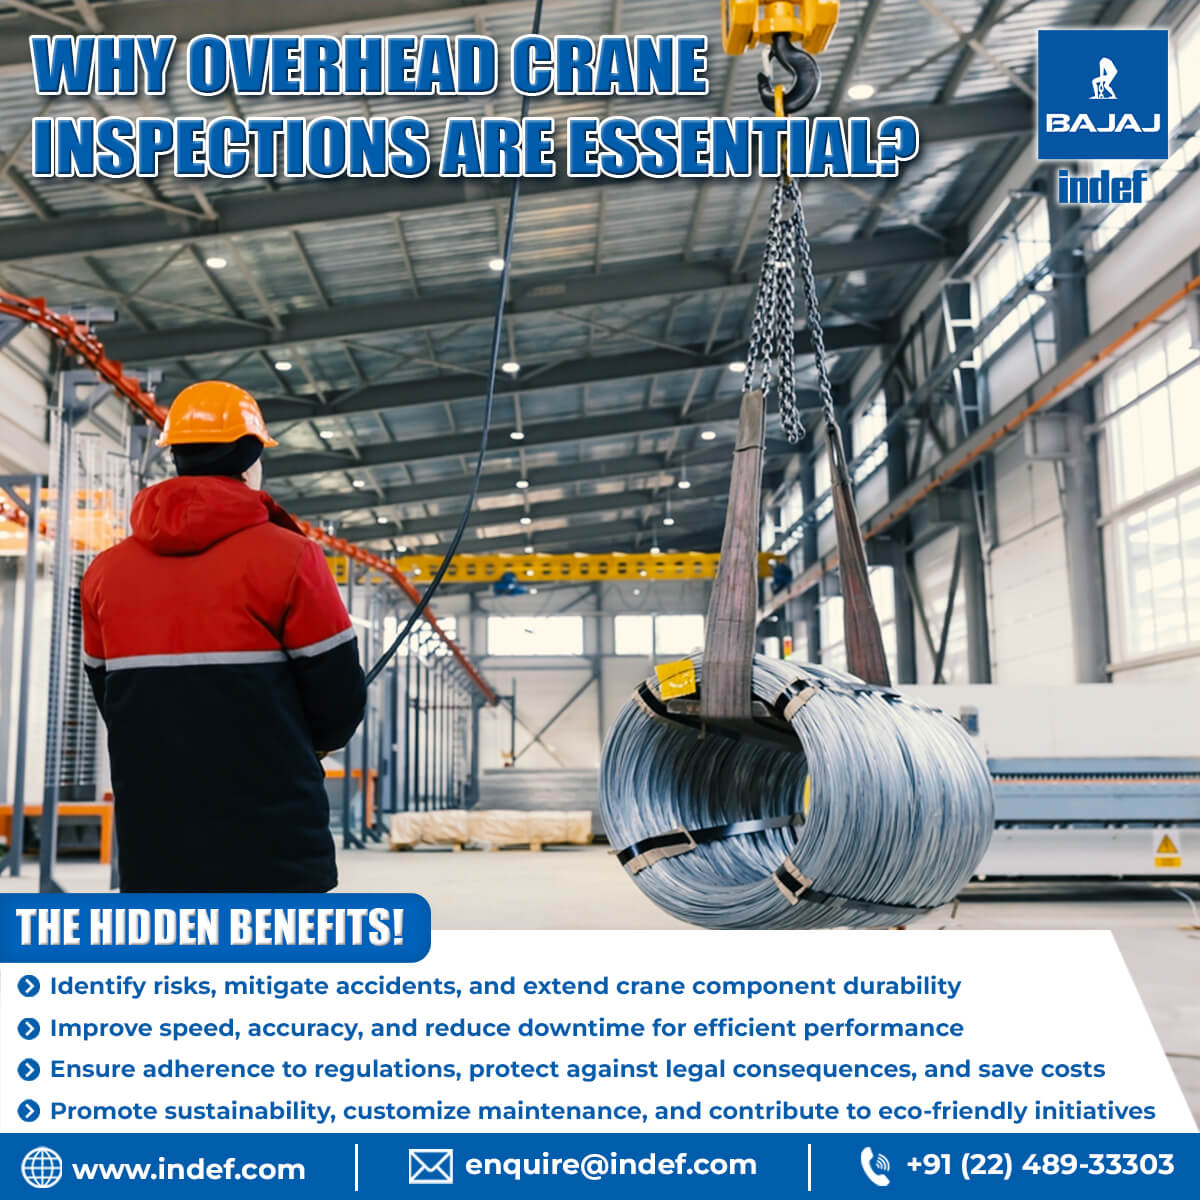 What are the Benefits of Regular Overhead Crane Inspections